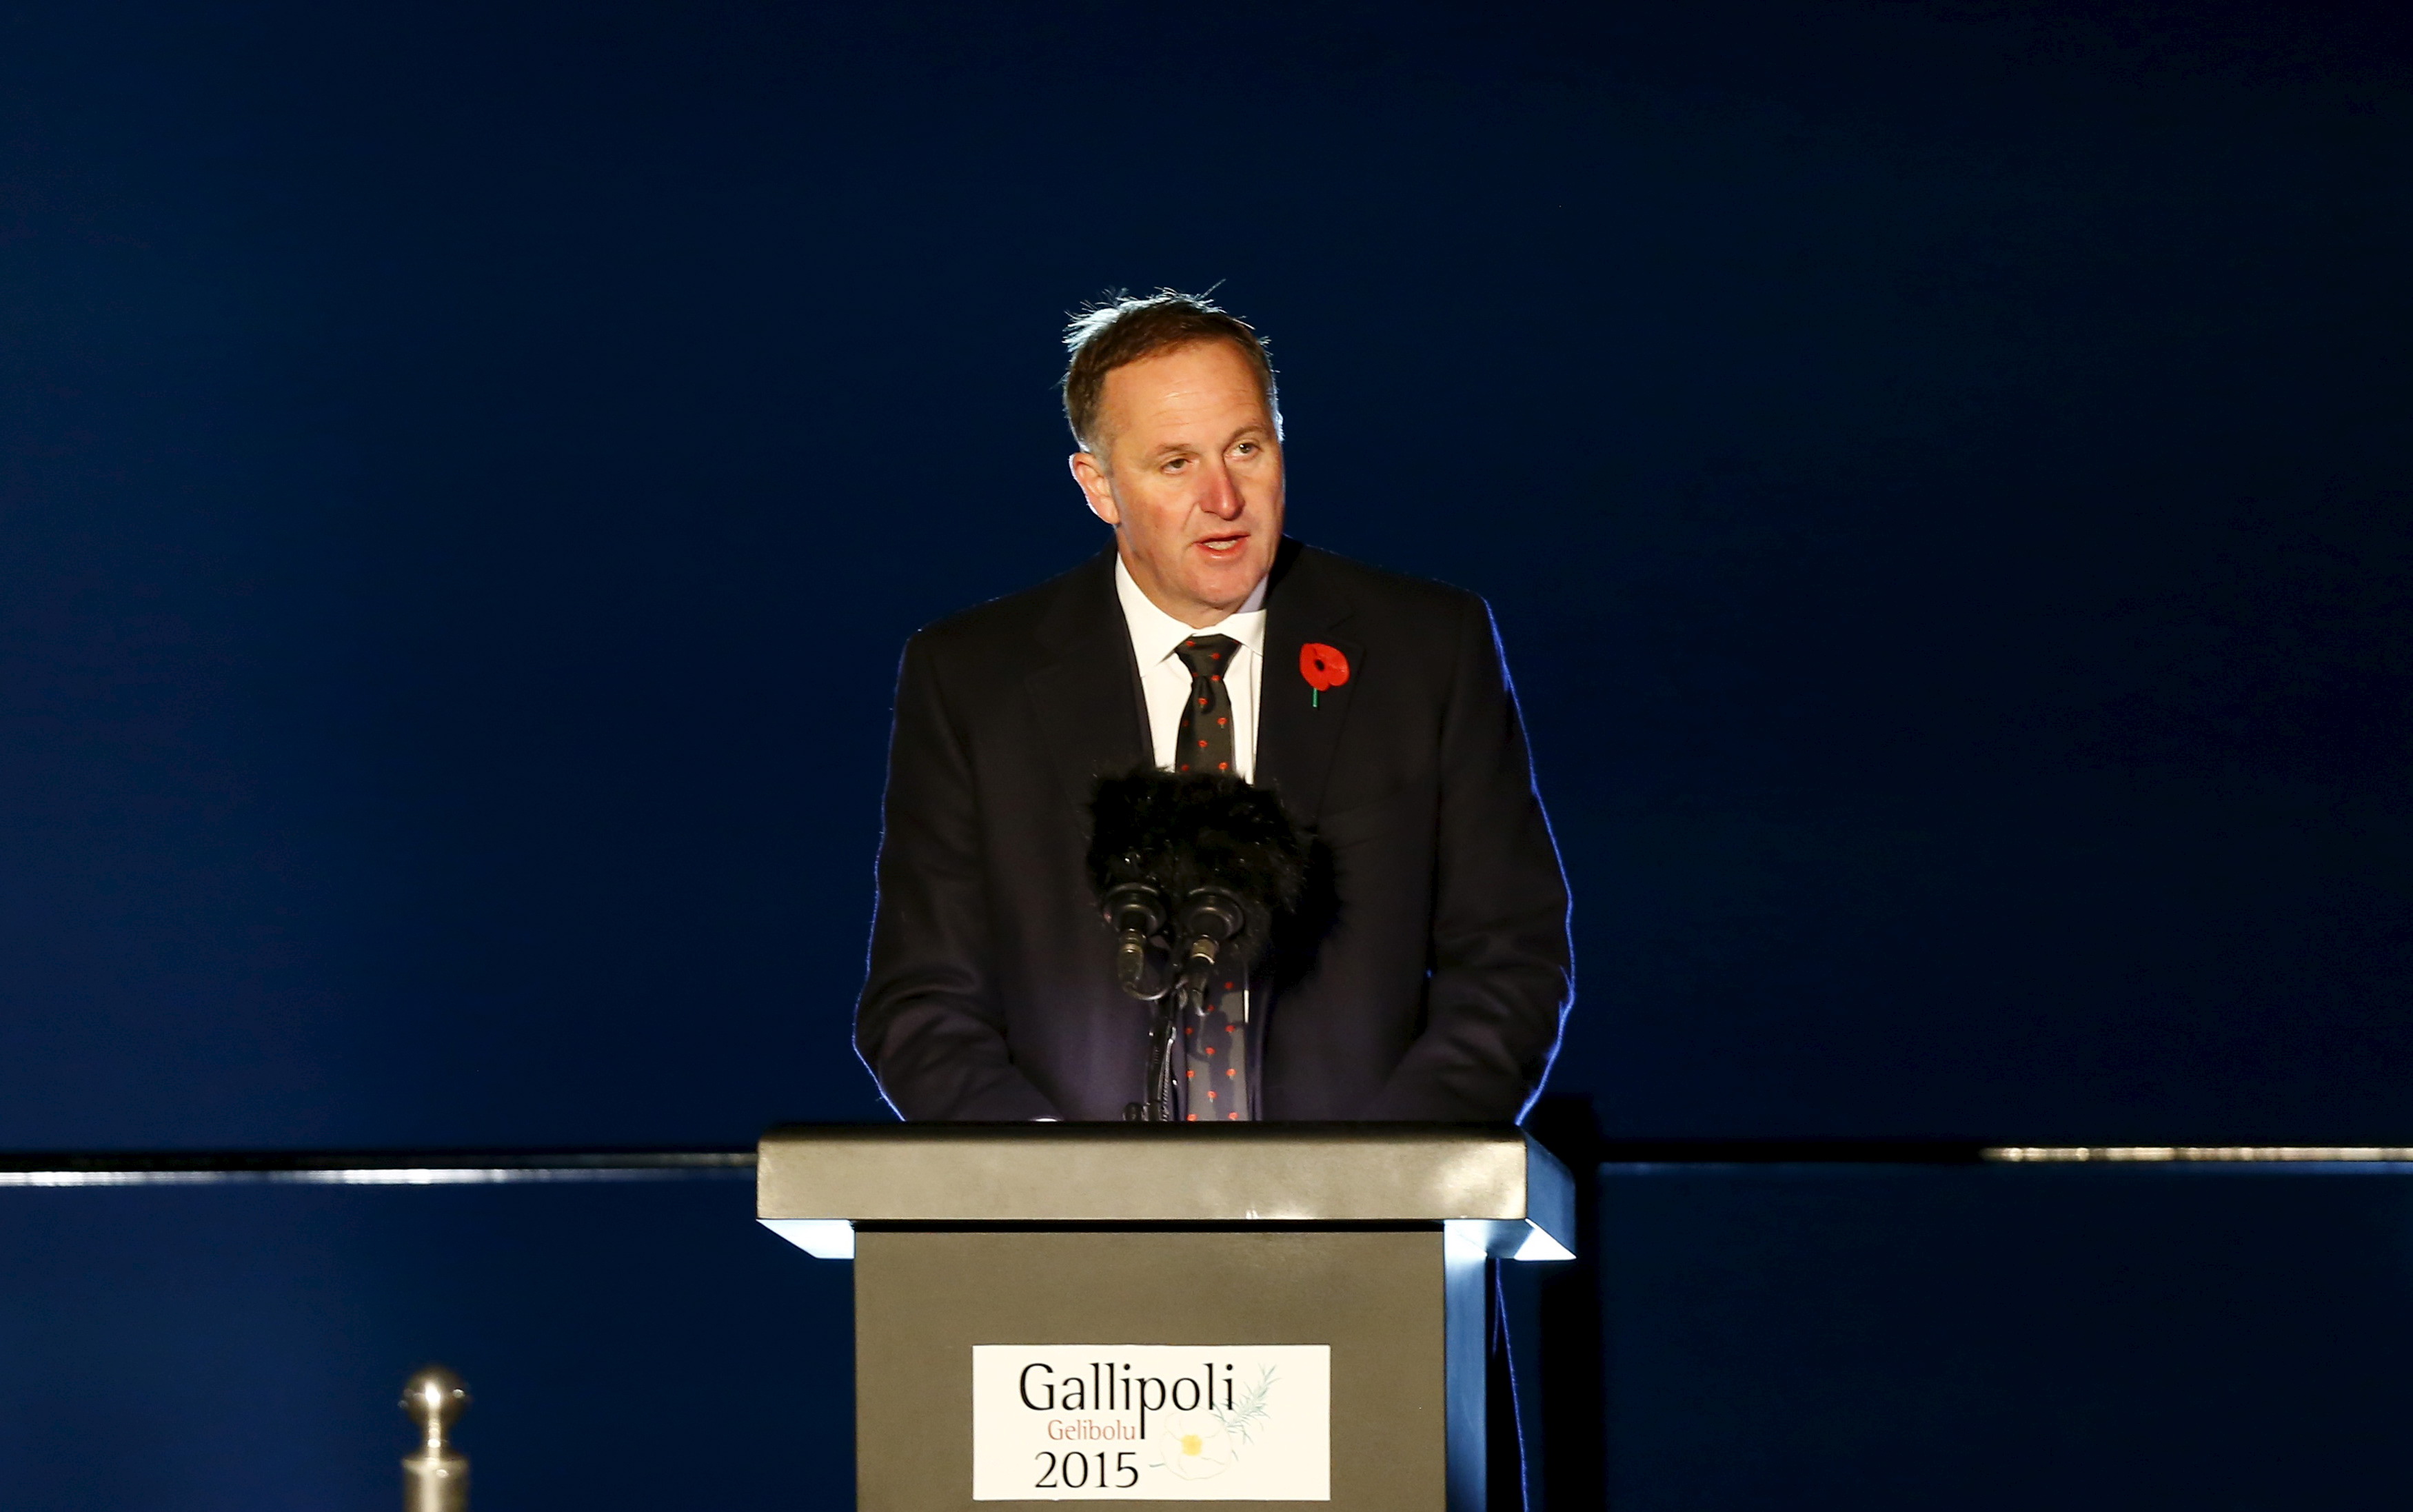 New Zealand's Prime Minister Key speaks during a dawn ceremony marking the 100th anniversary of the Battle of Gallipoli, at Anzac Cove in Gallipoli